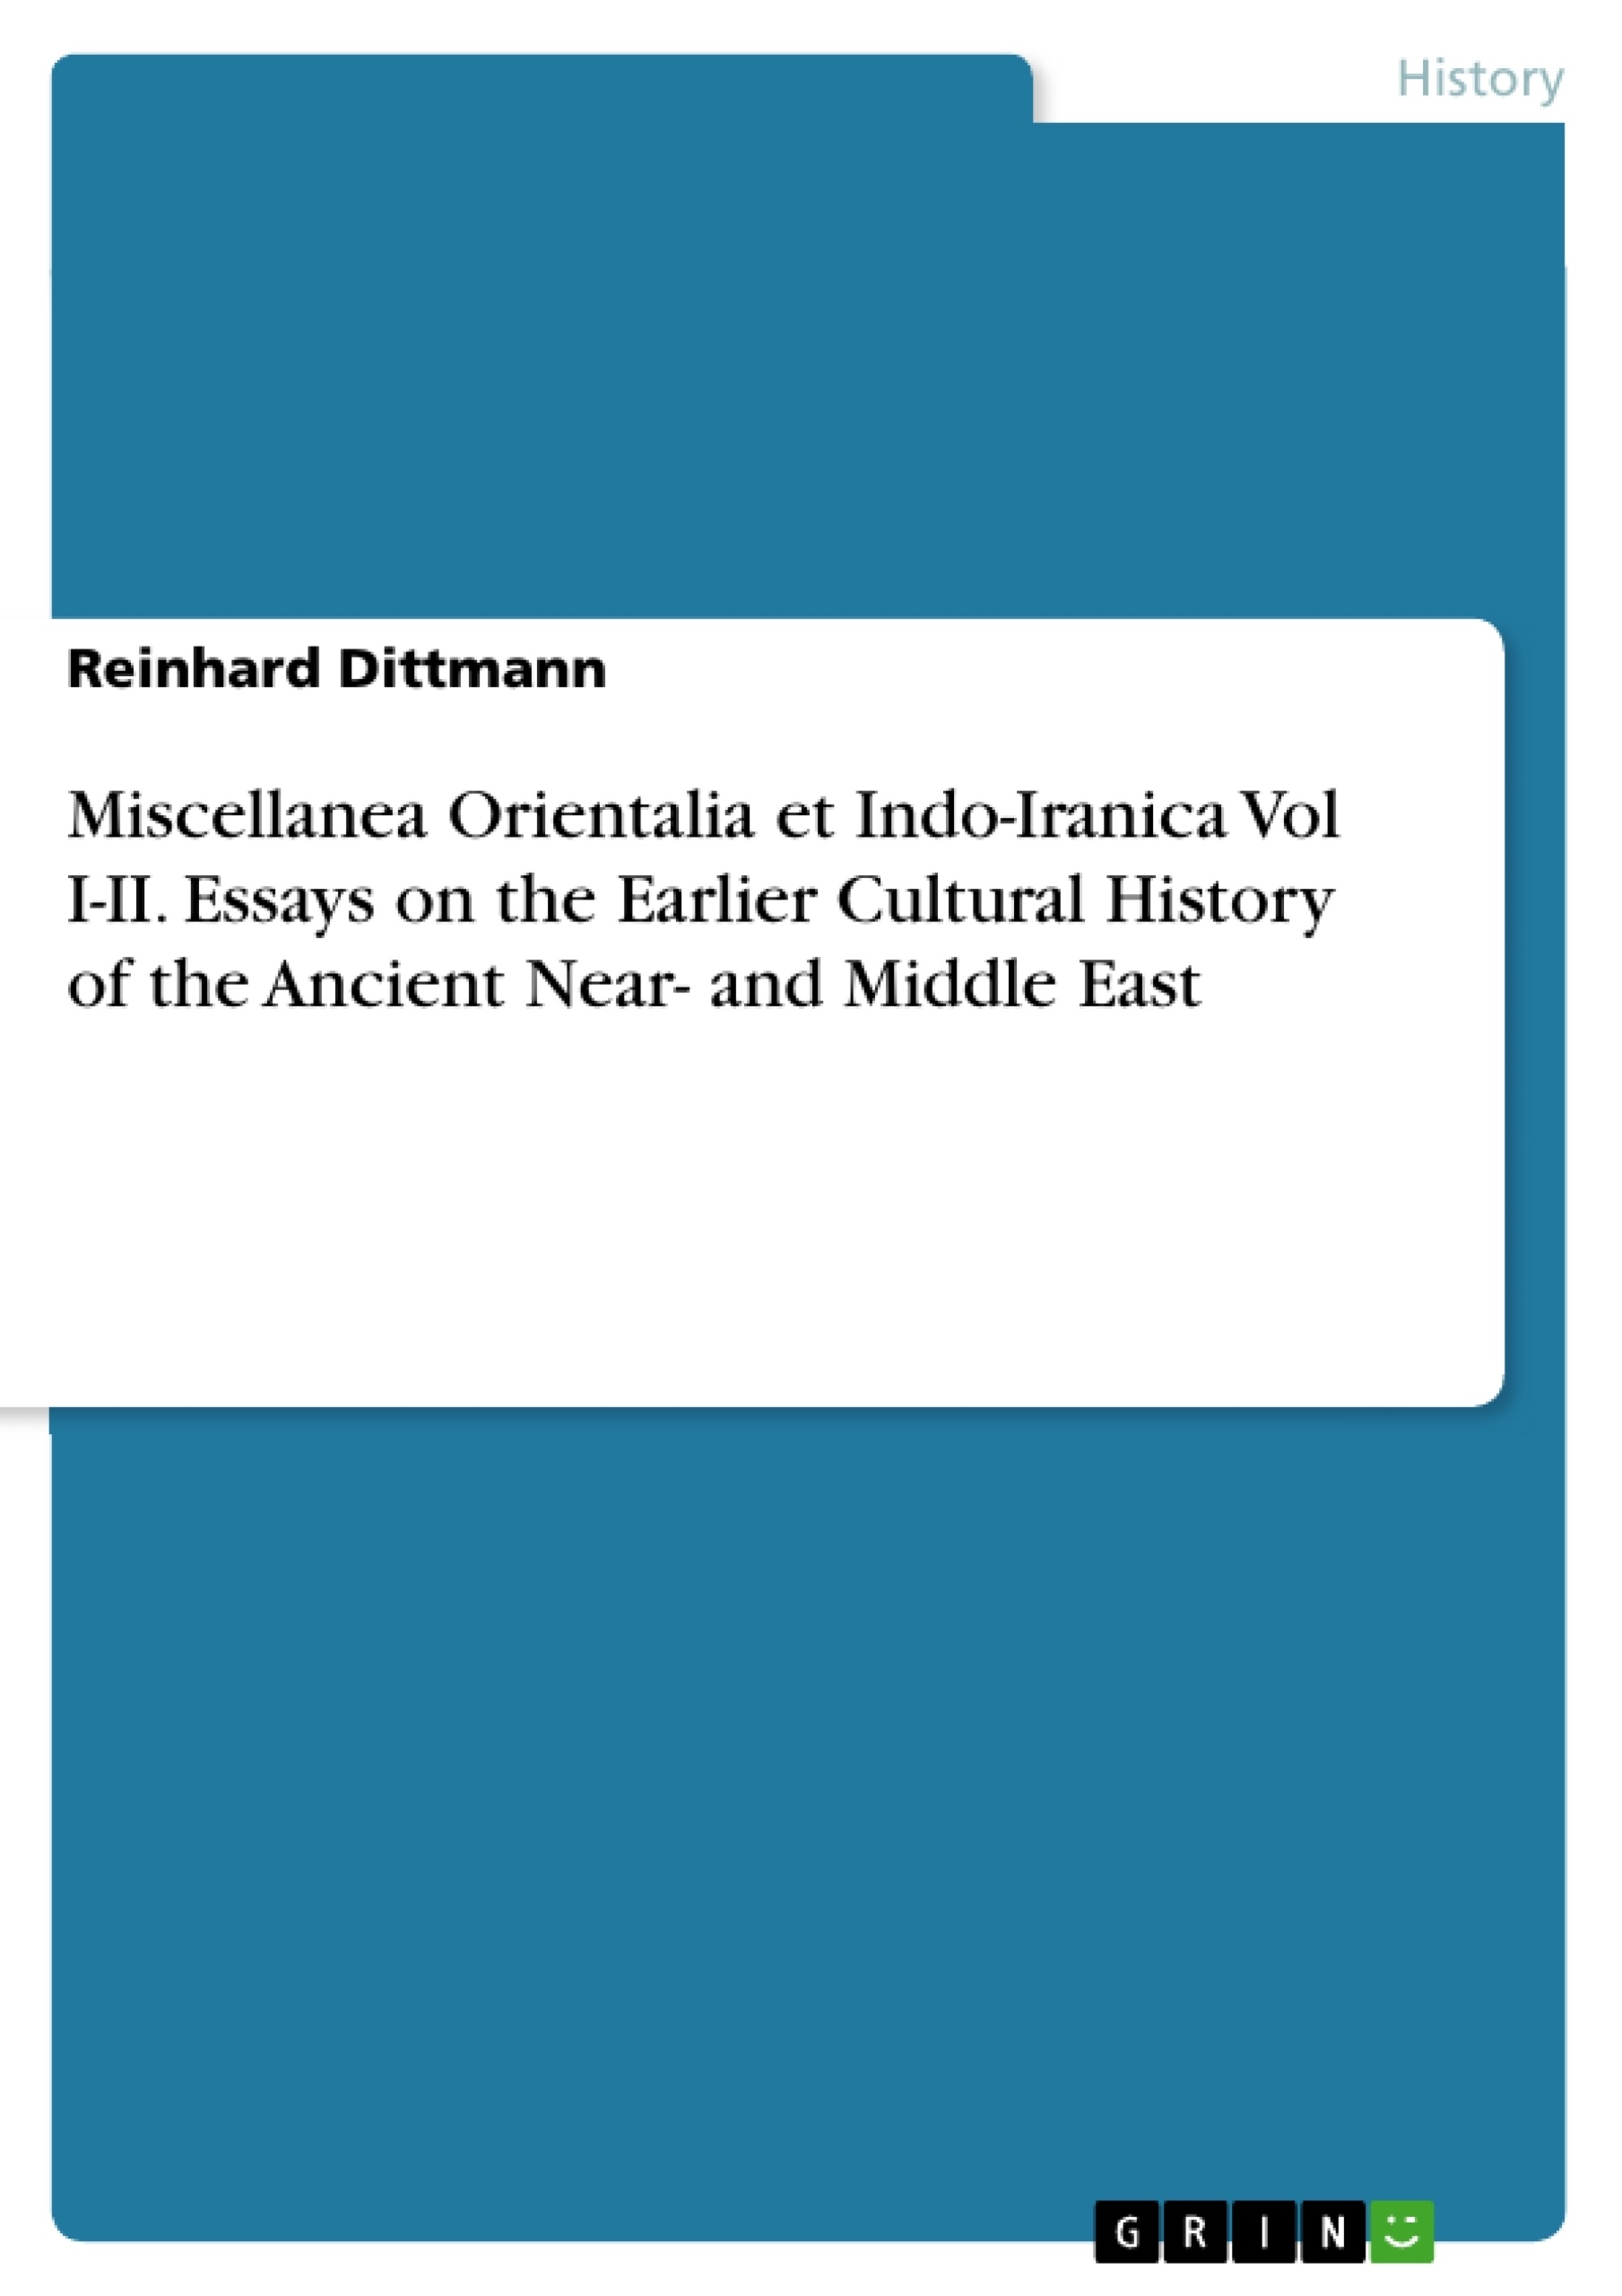 Ancient　Essays　the　Earlier　East　History　Vol　Indo-Iranica　Cultural　Middle　on　I-II.　and　of　Miscellanea　GRIN　the　Orientalia　et　Near-